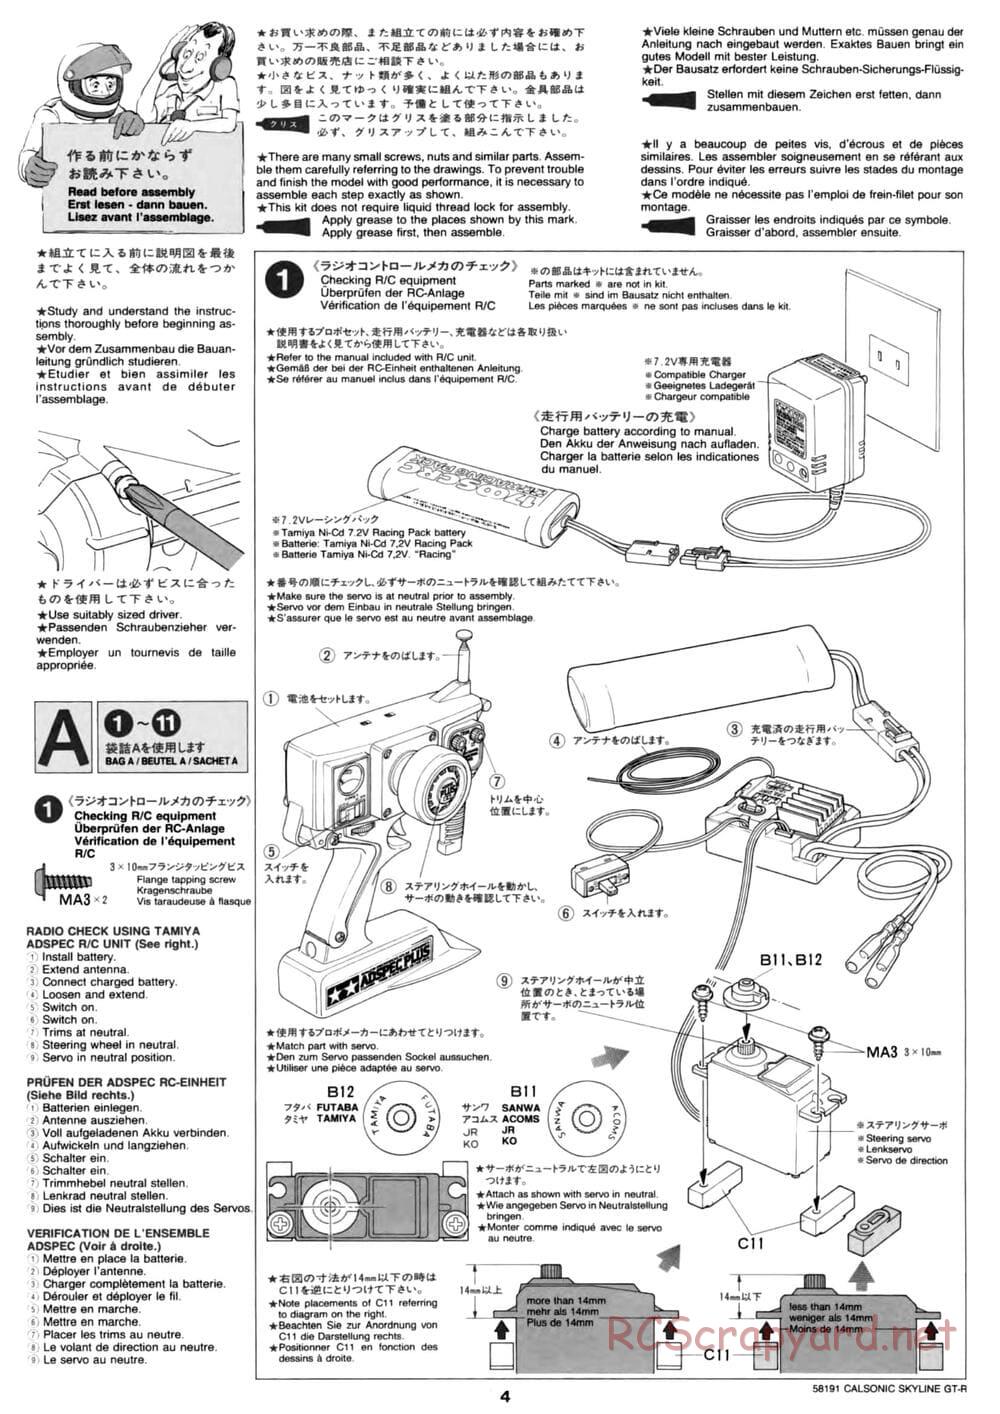 Tamiya - Calsonic Skyline GT-R - TL-01 Chassis - Manual - Page 4